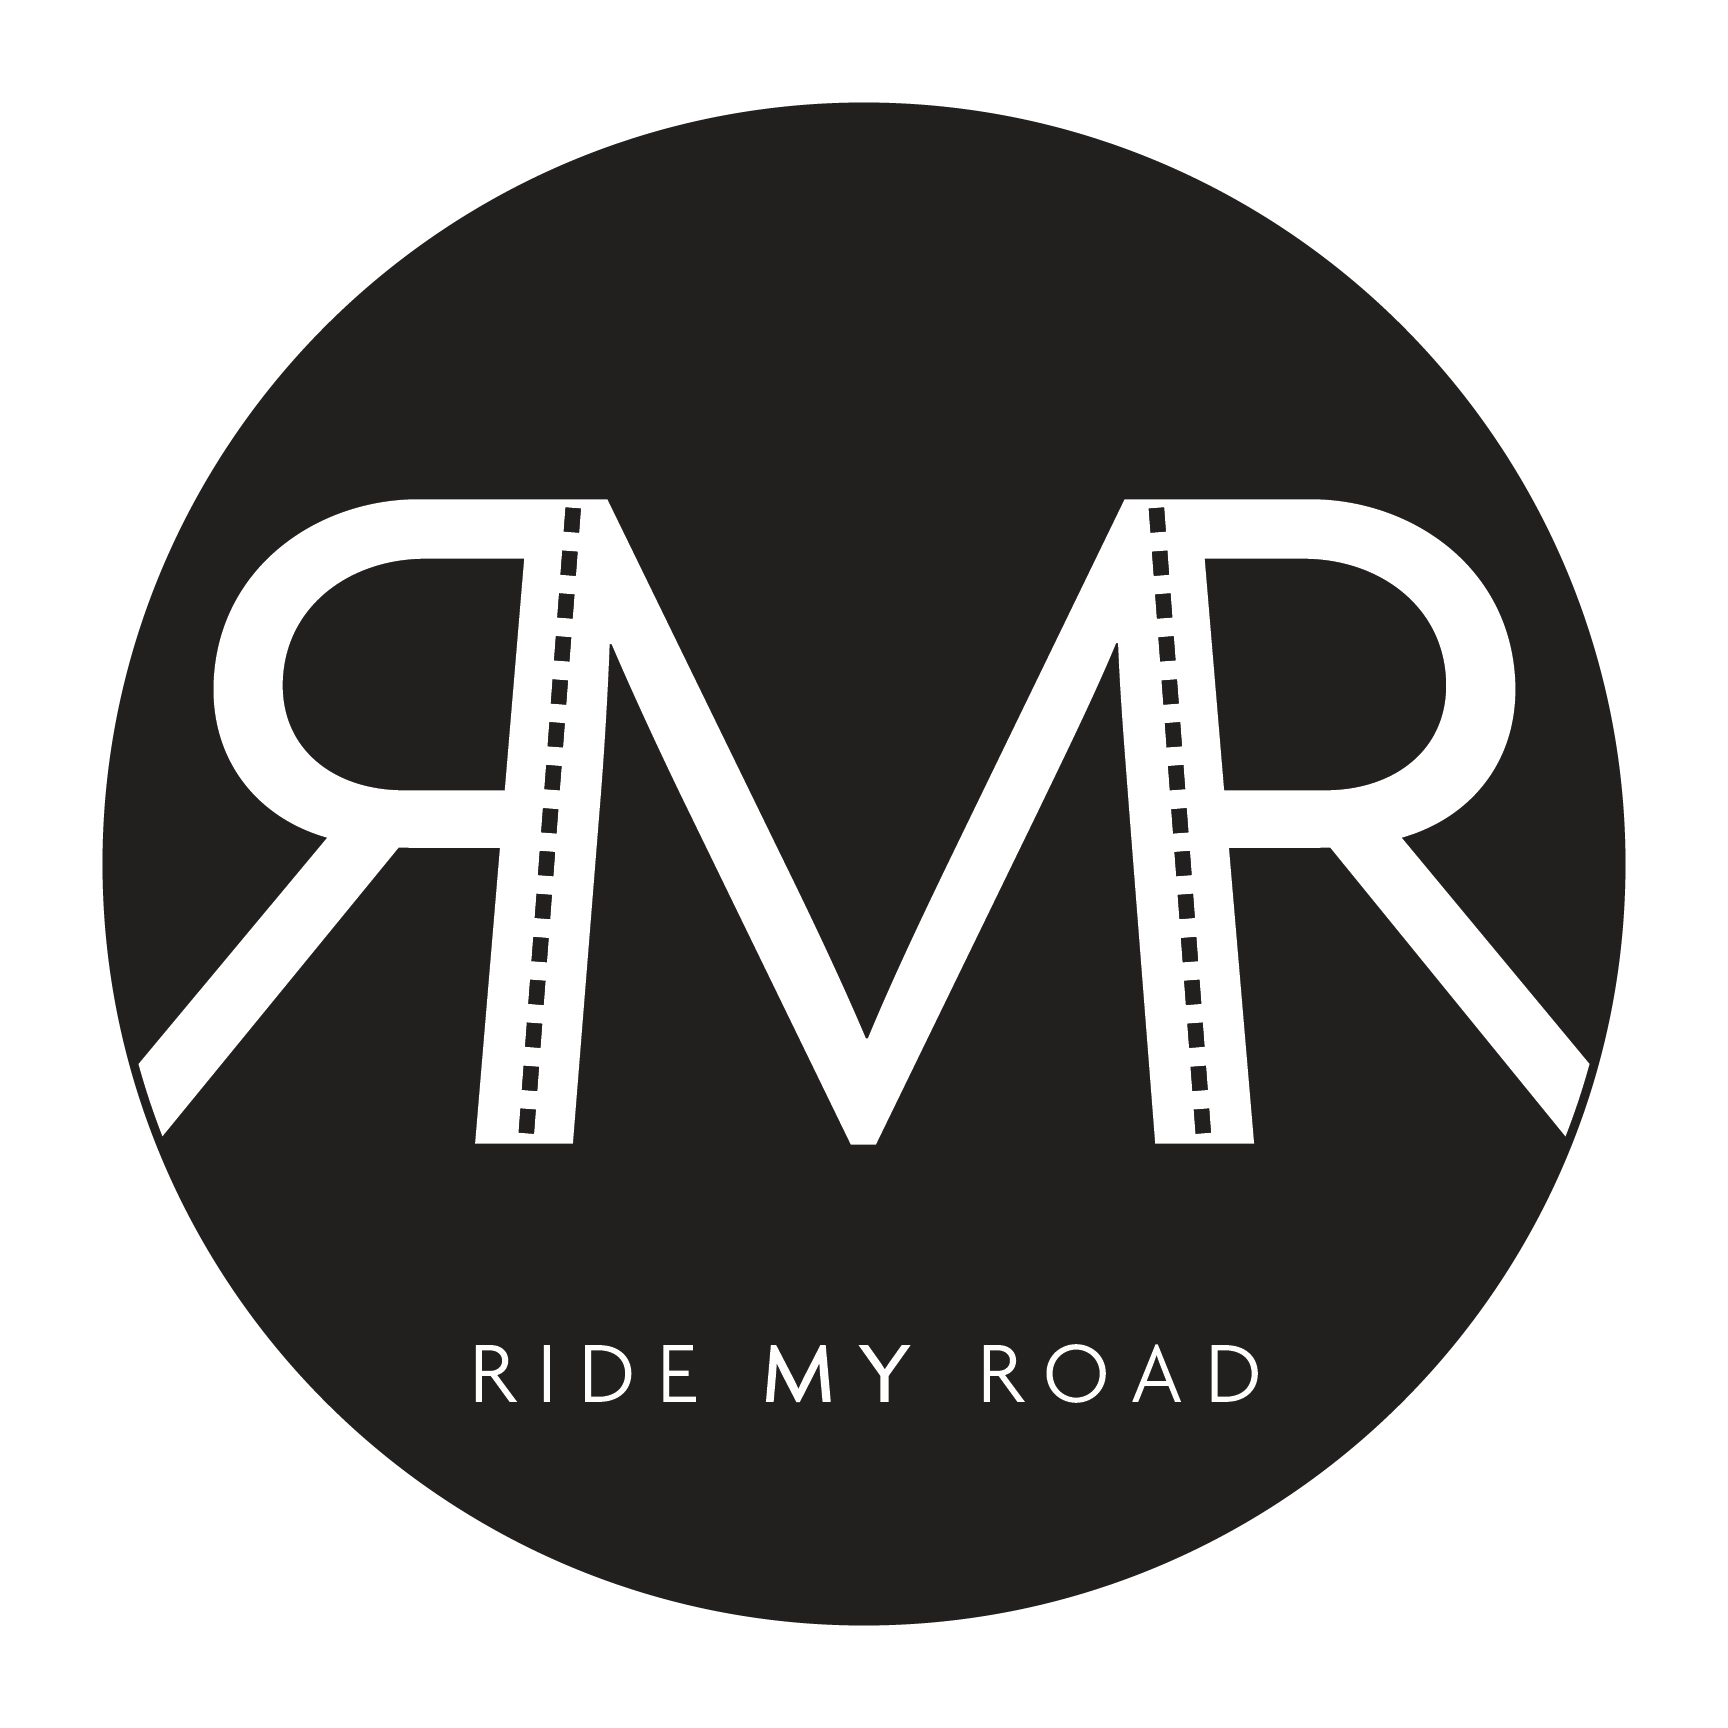 Ride My Road